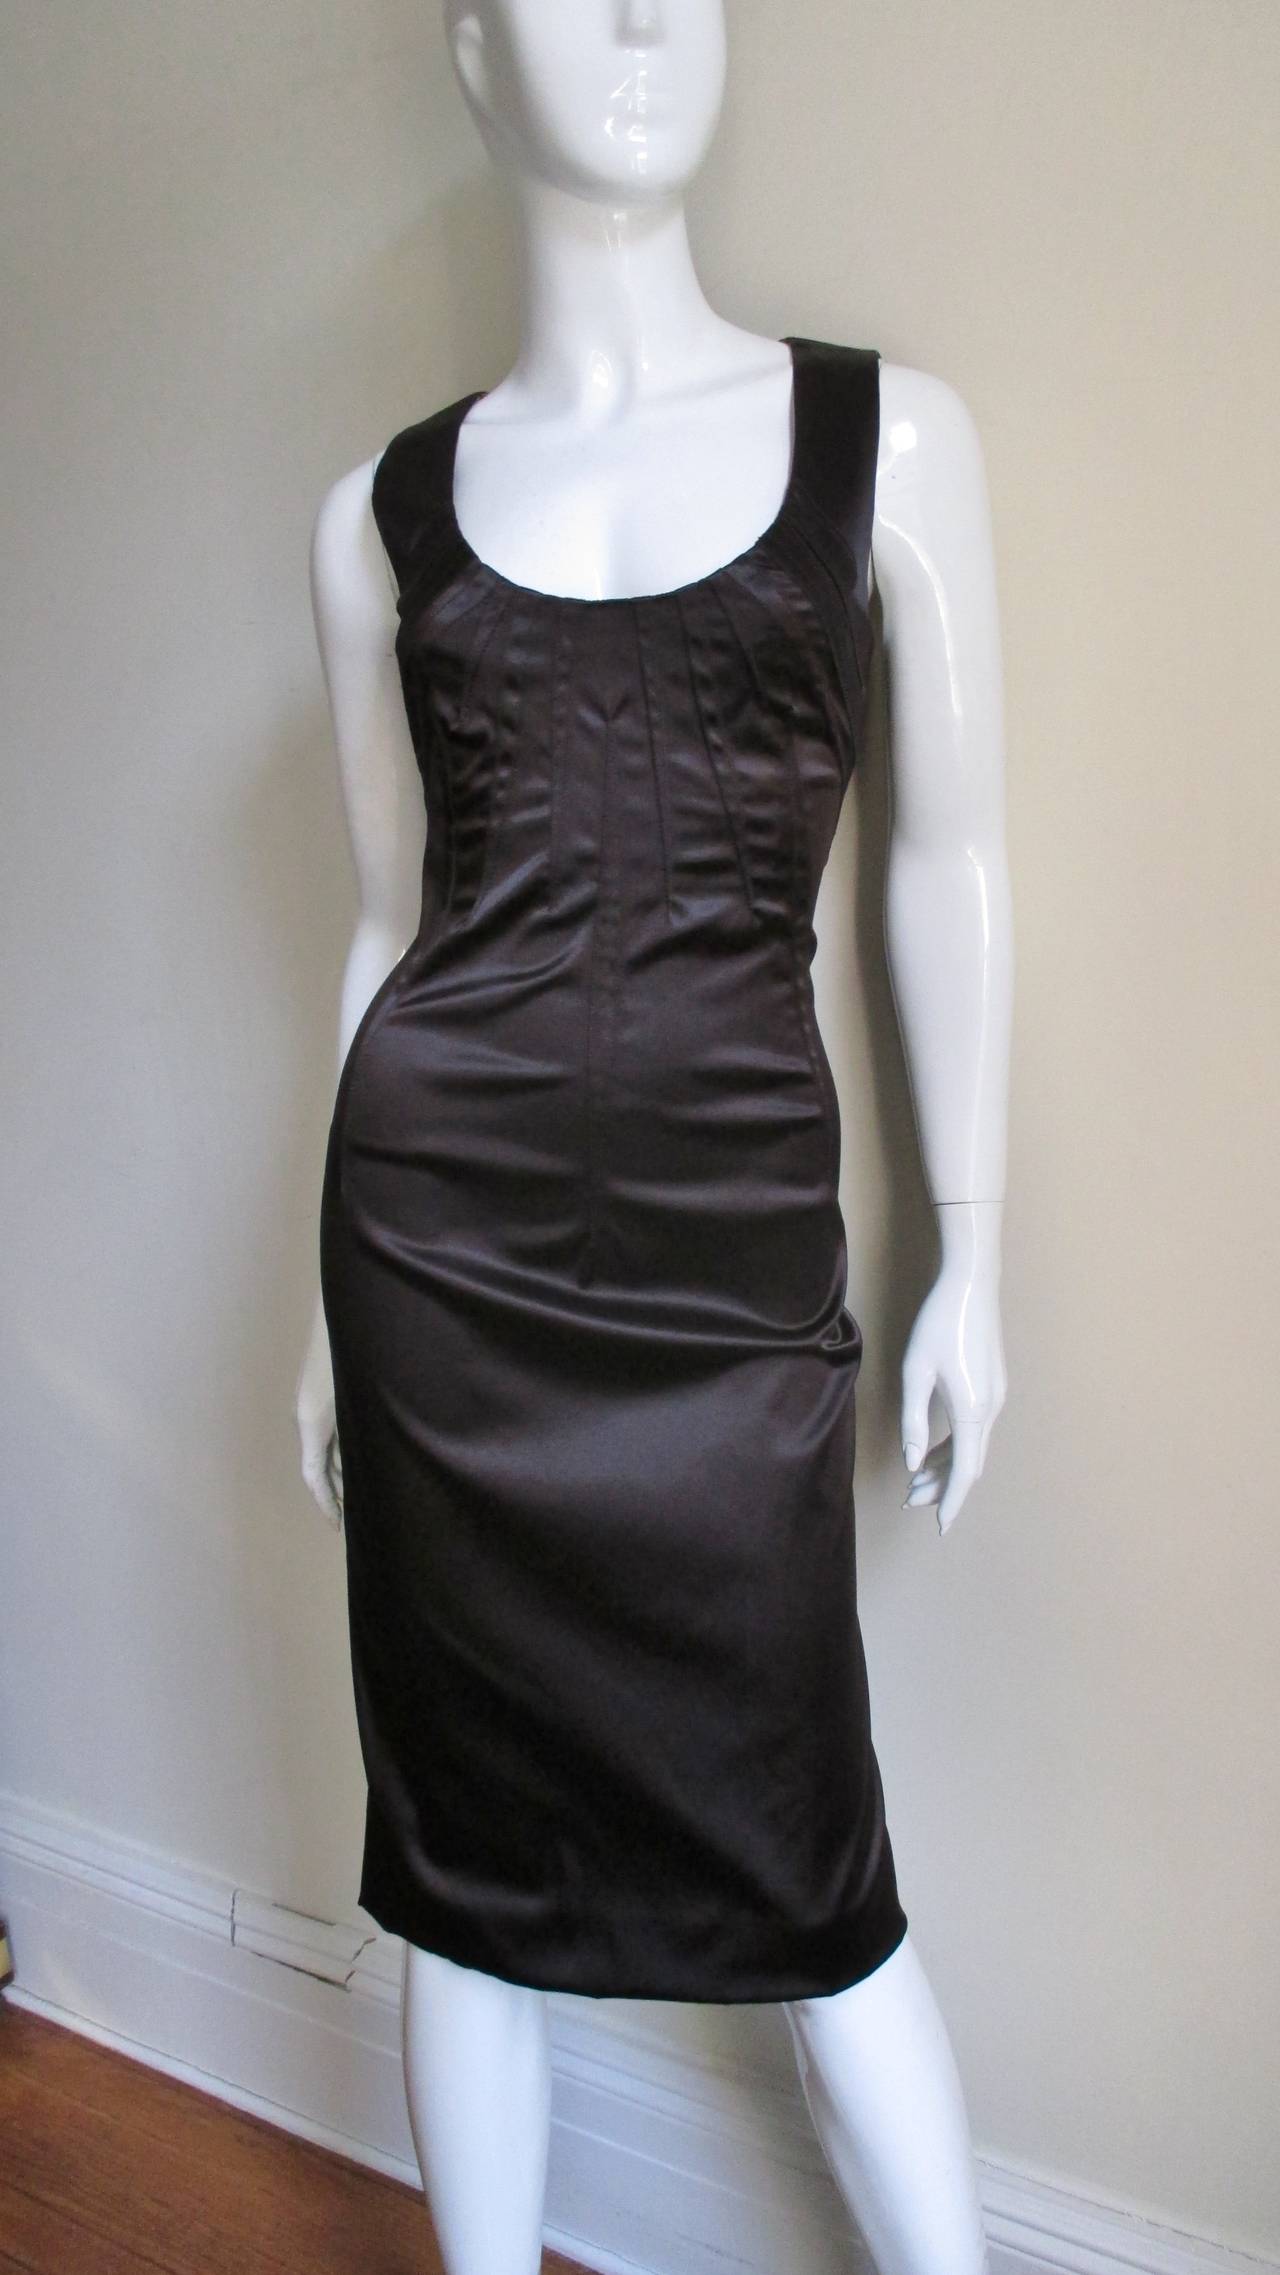 A Dolce & Gabbana silk fitted dress in a rich dark brown with elaborate top stitched darting detail fanning out from the scoop neckline front and back.  It has a center back zipper and leopard silk lining. 
Fits size Small, Medium.

Bust  34